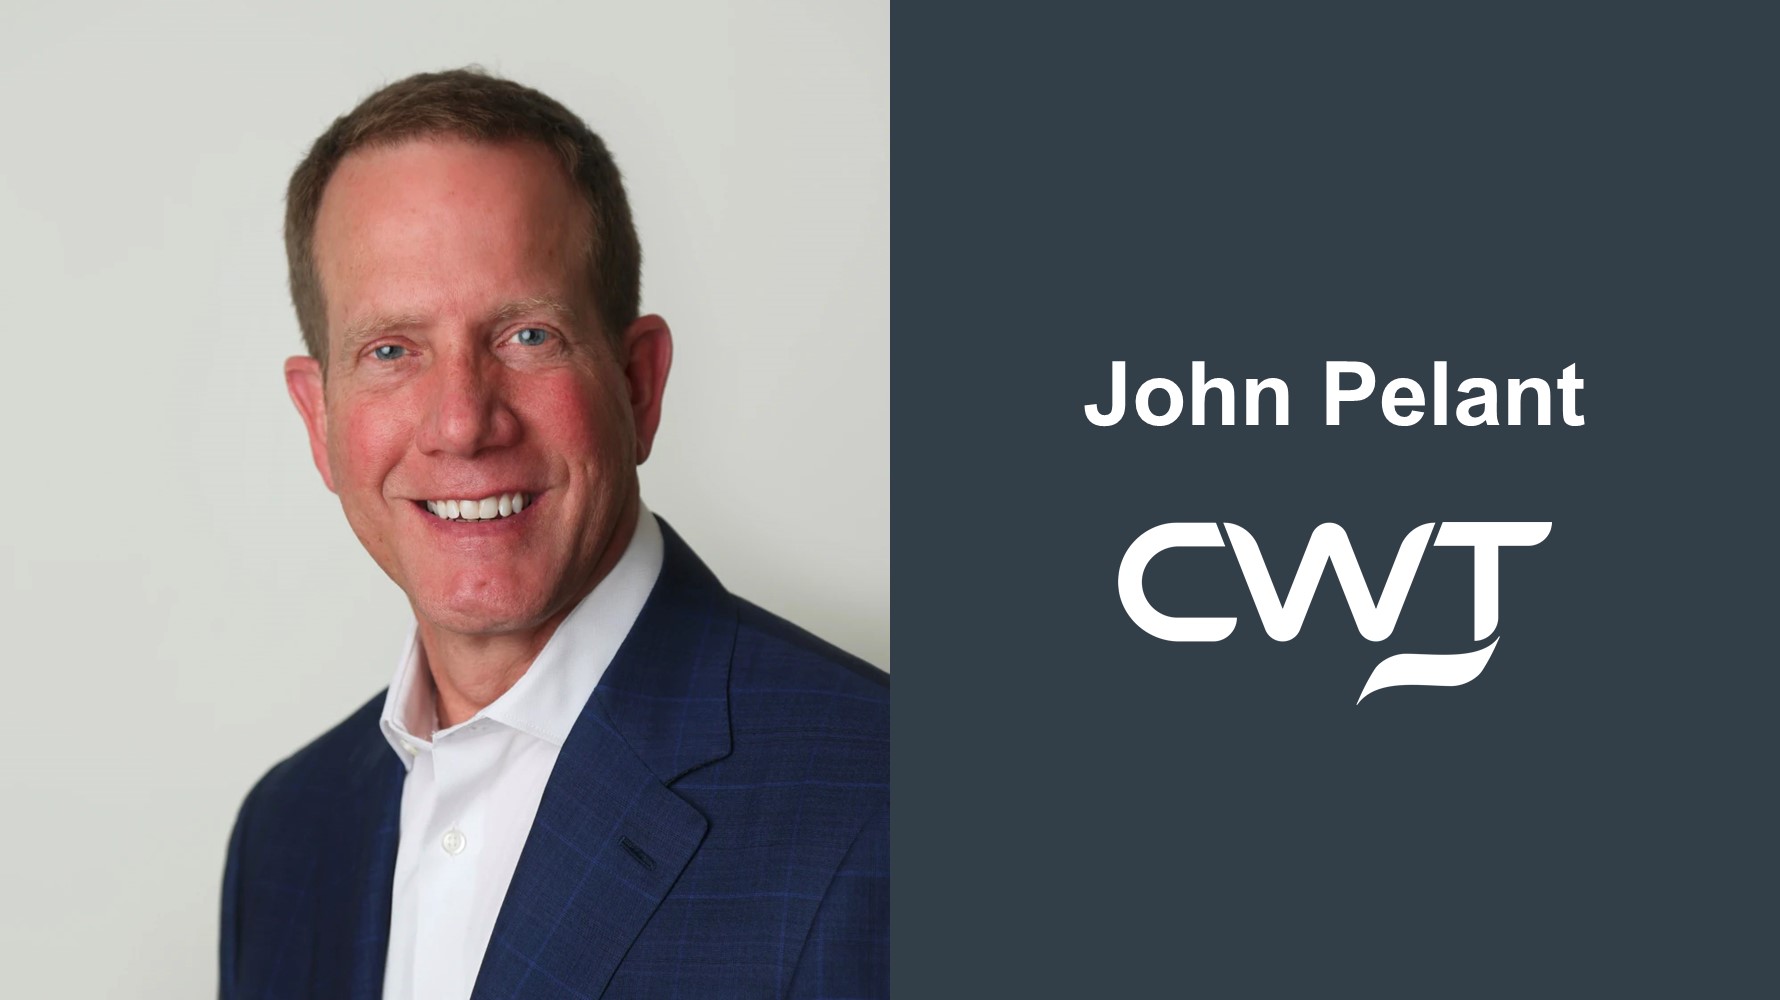 CWT INVESTS $100 MILLION IN NEW TECHNOLOGY TO ENHANCE TRAVEL MANAGEMENT PLATFORM